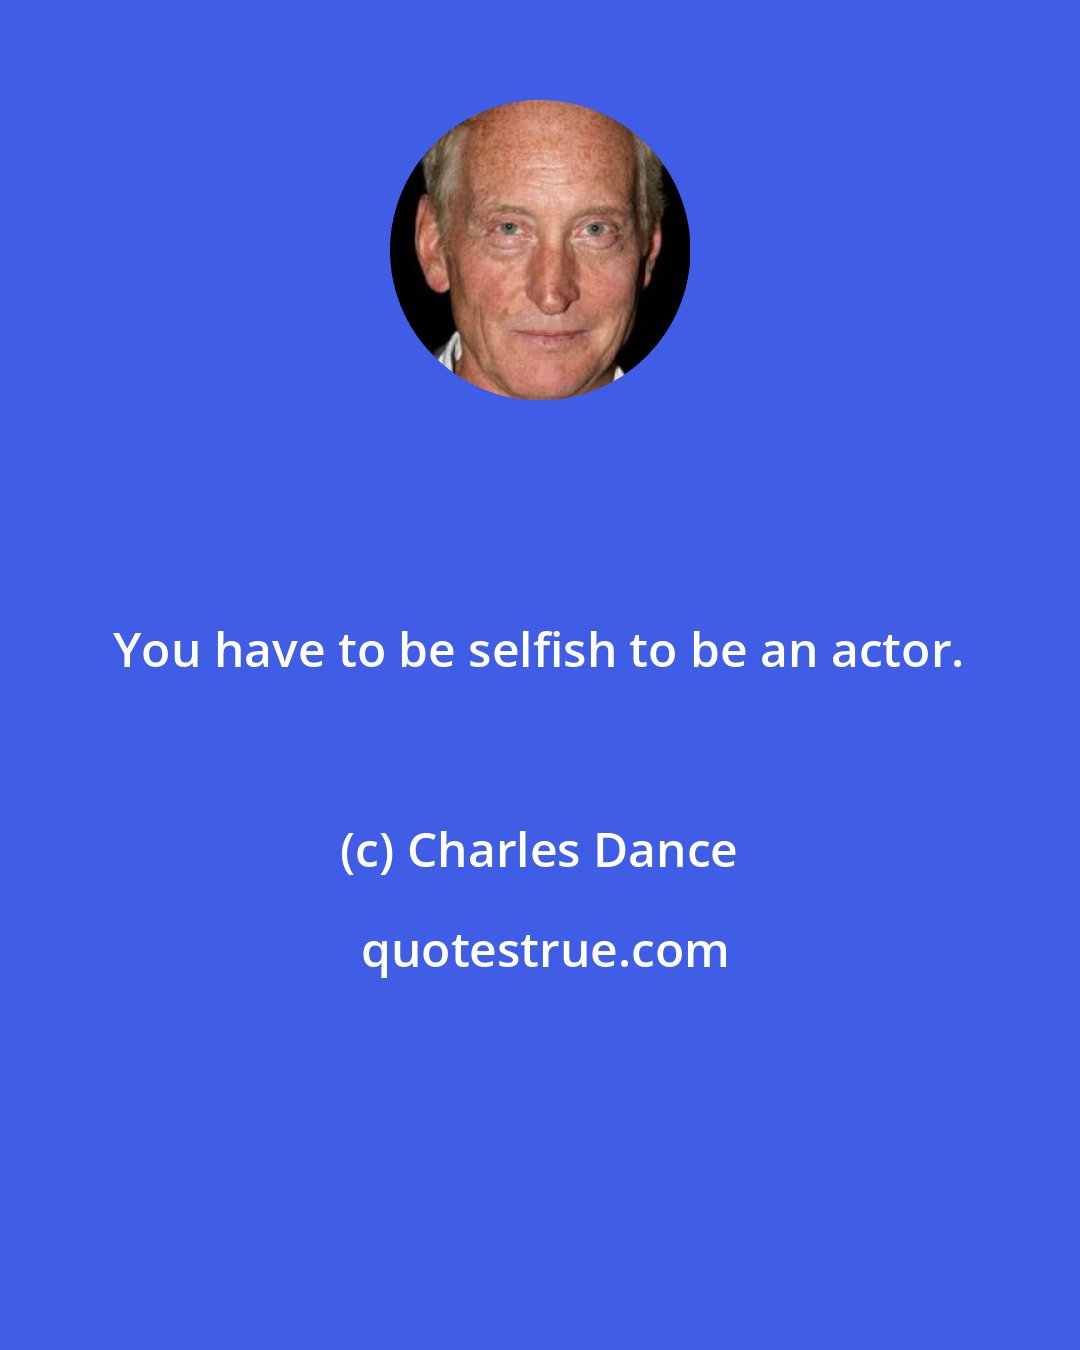 Charles Dance: You have to be selfish to be an actor.